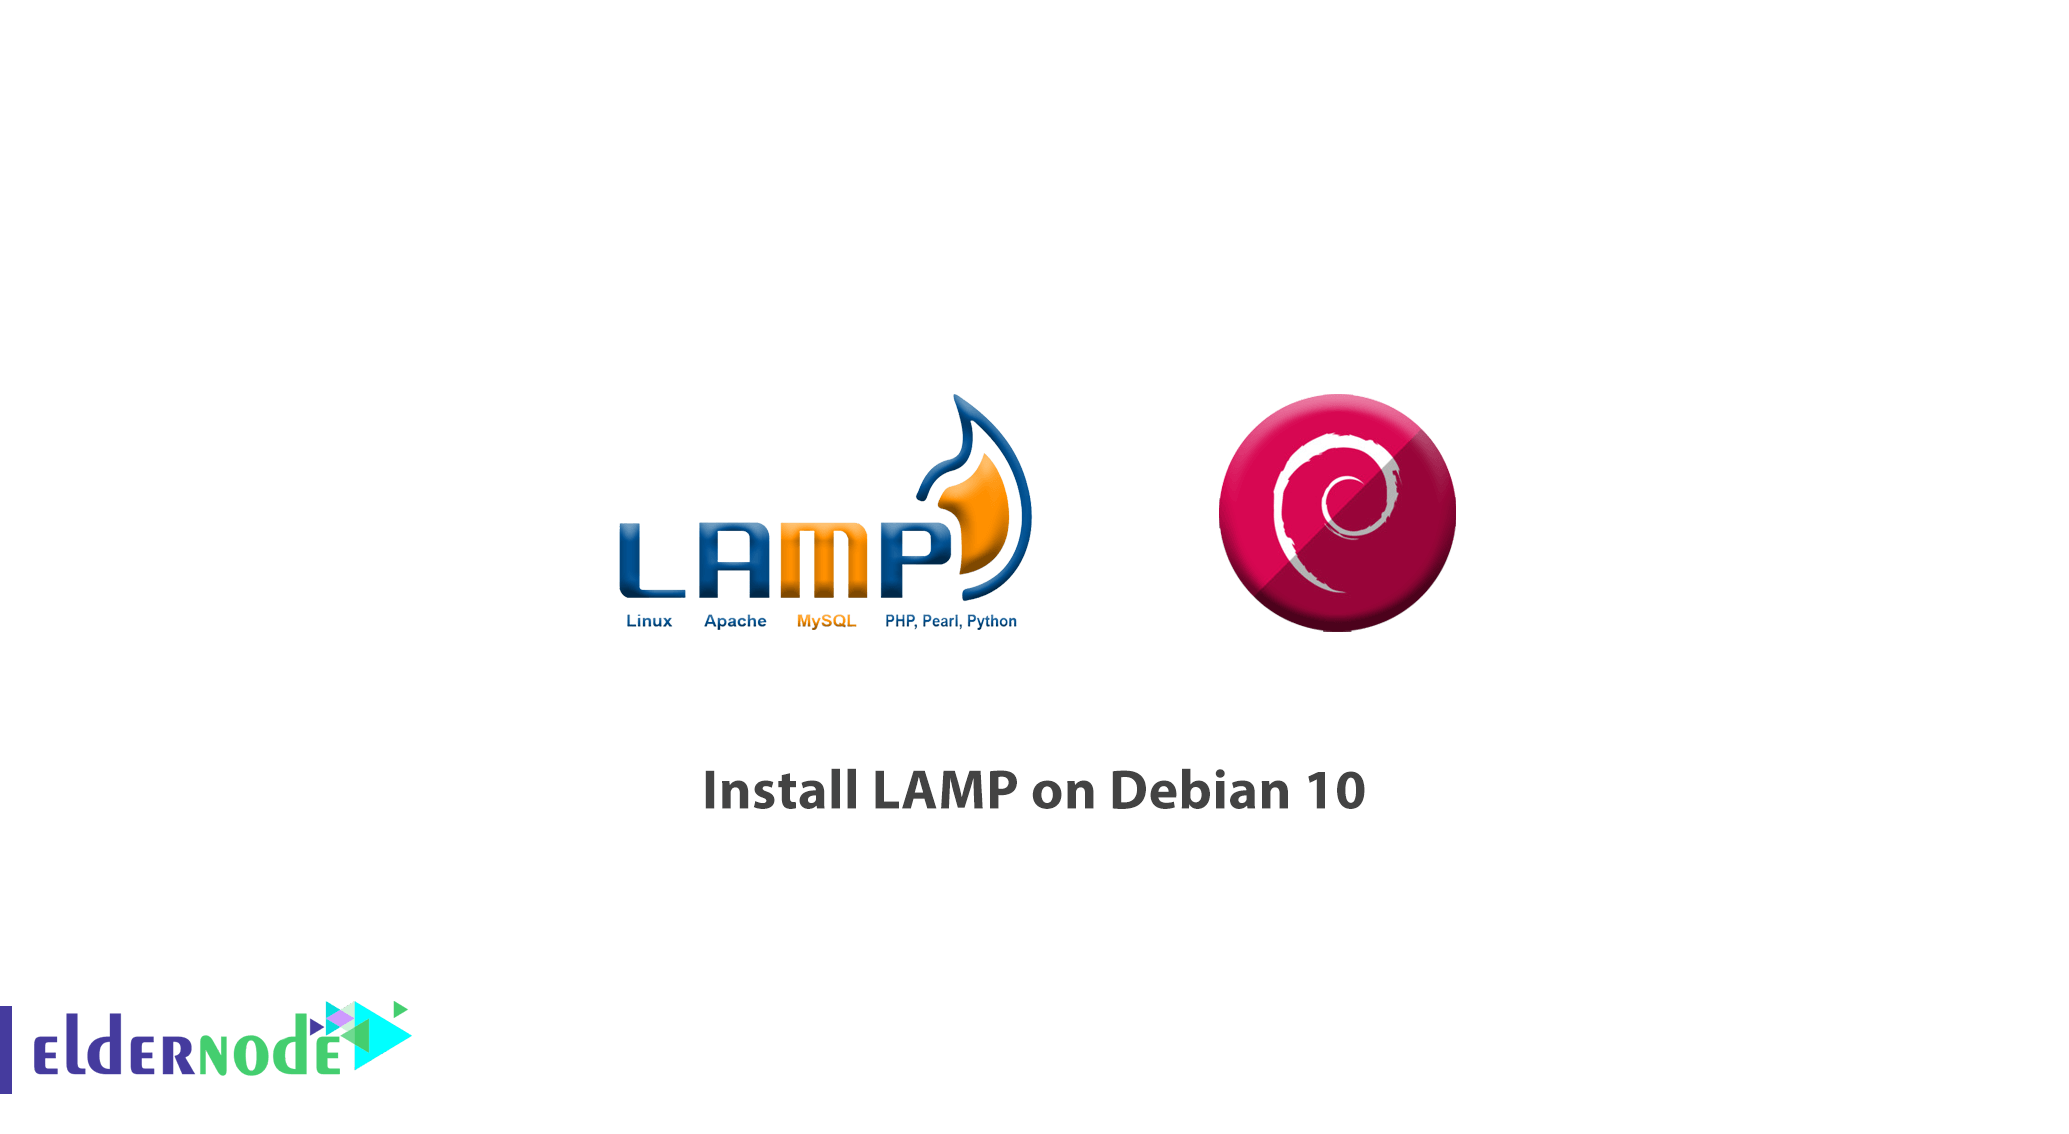 How to install LAMP on Debian 10